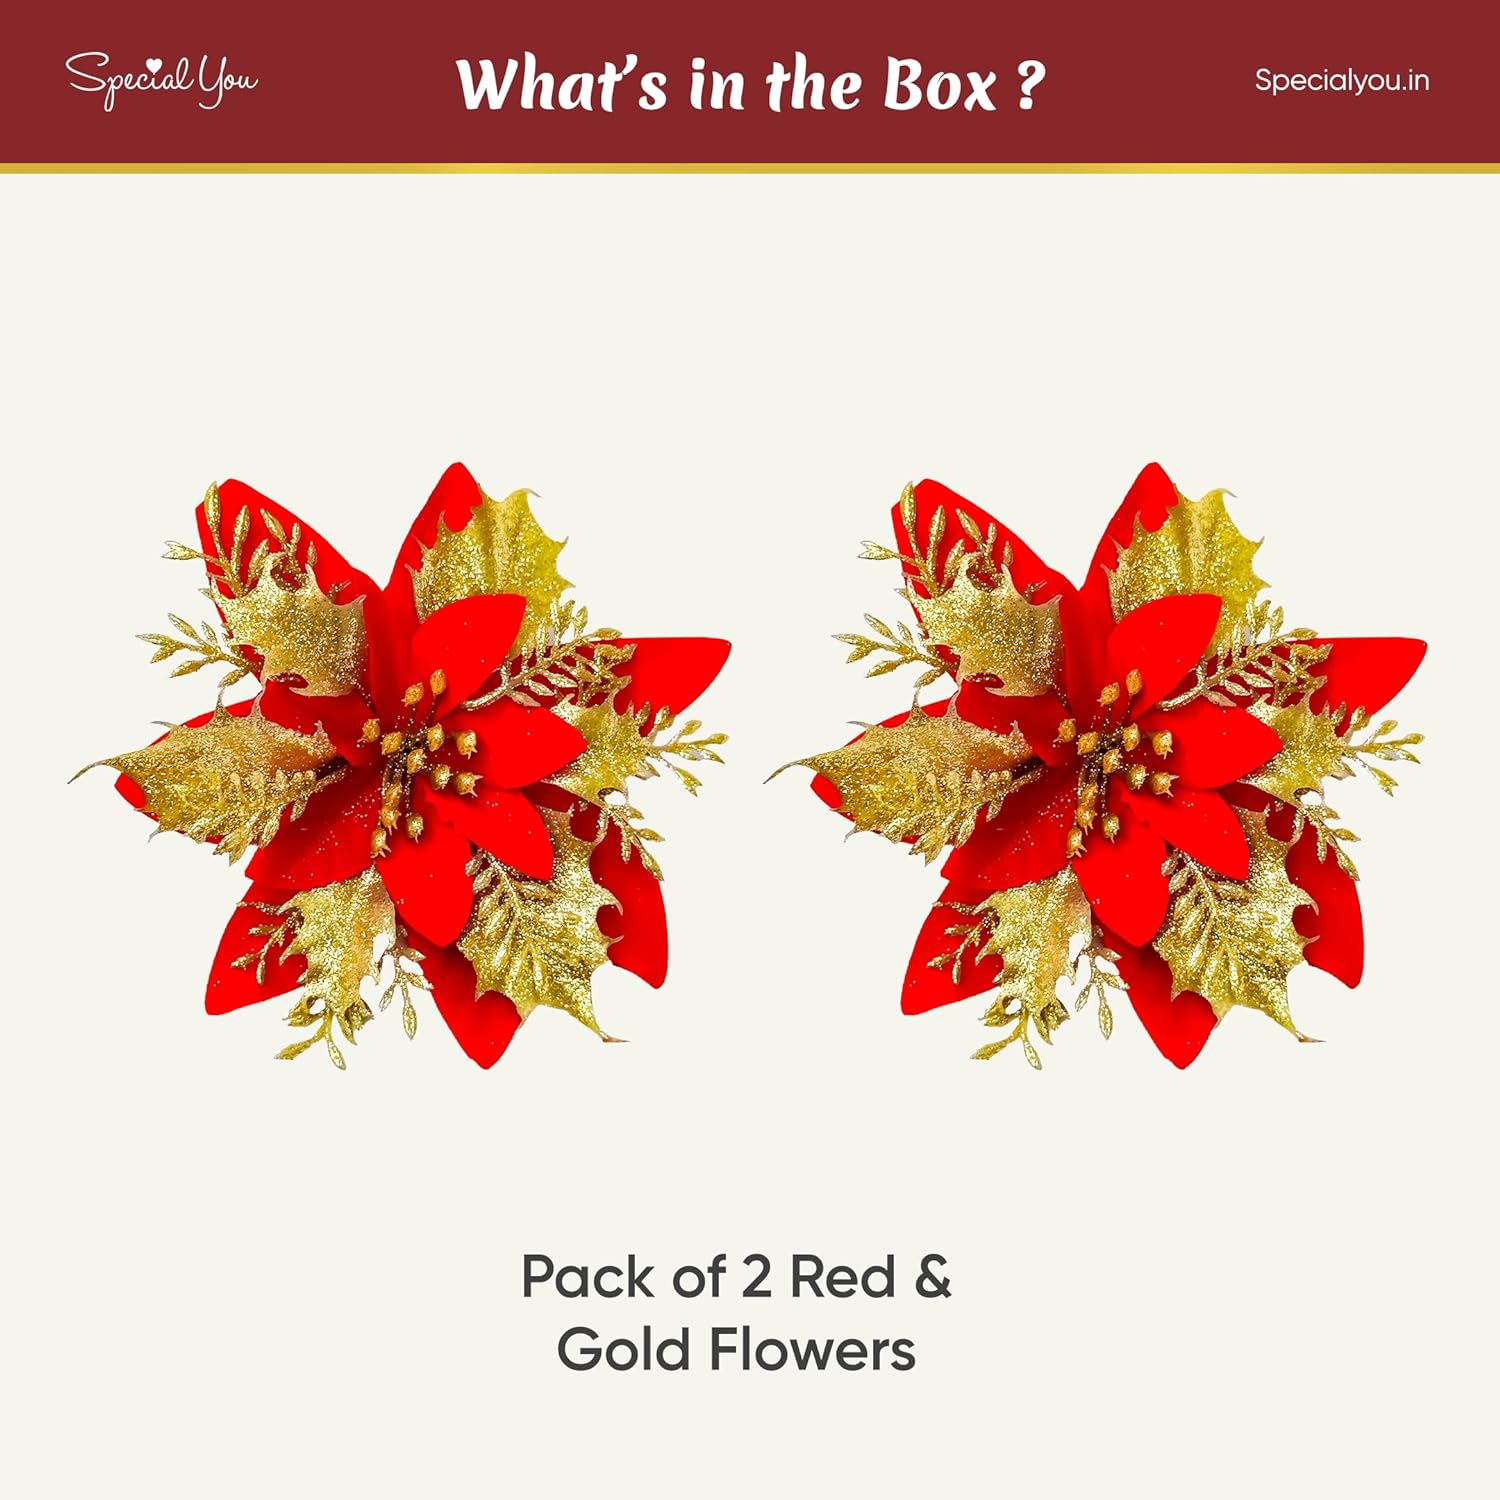 2 red & gold fllowers